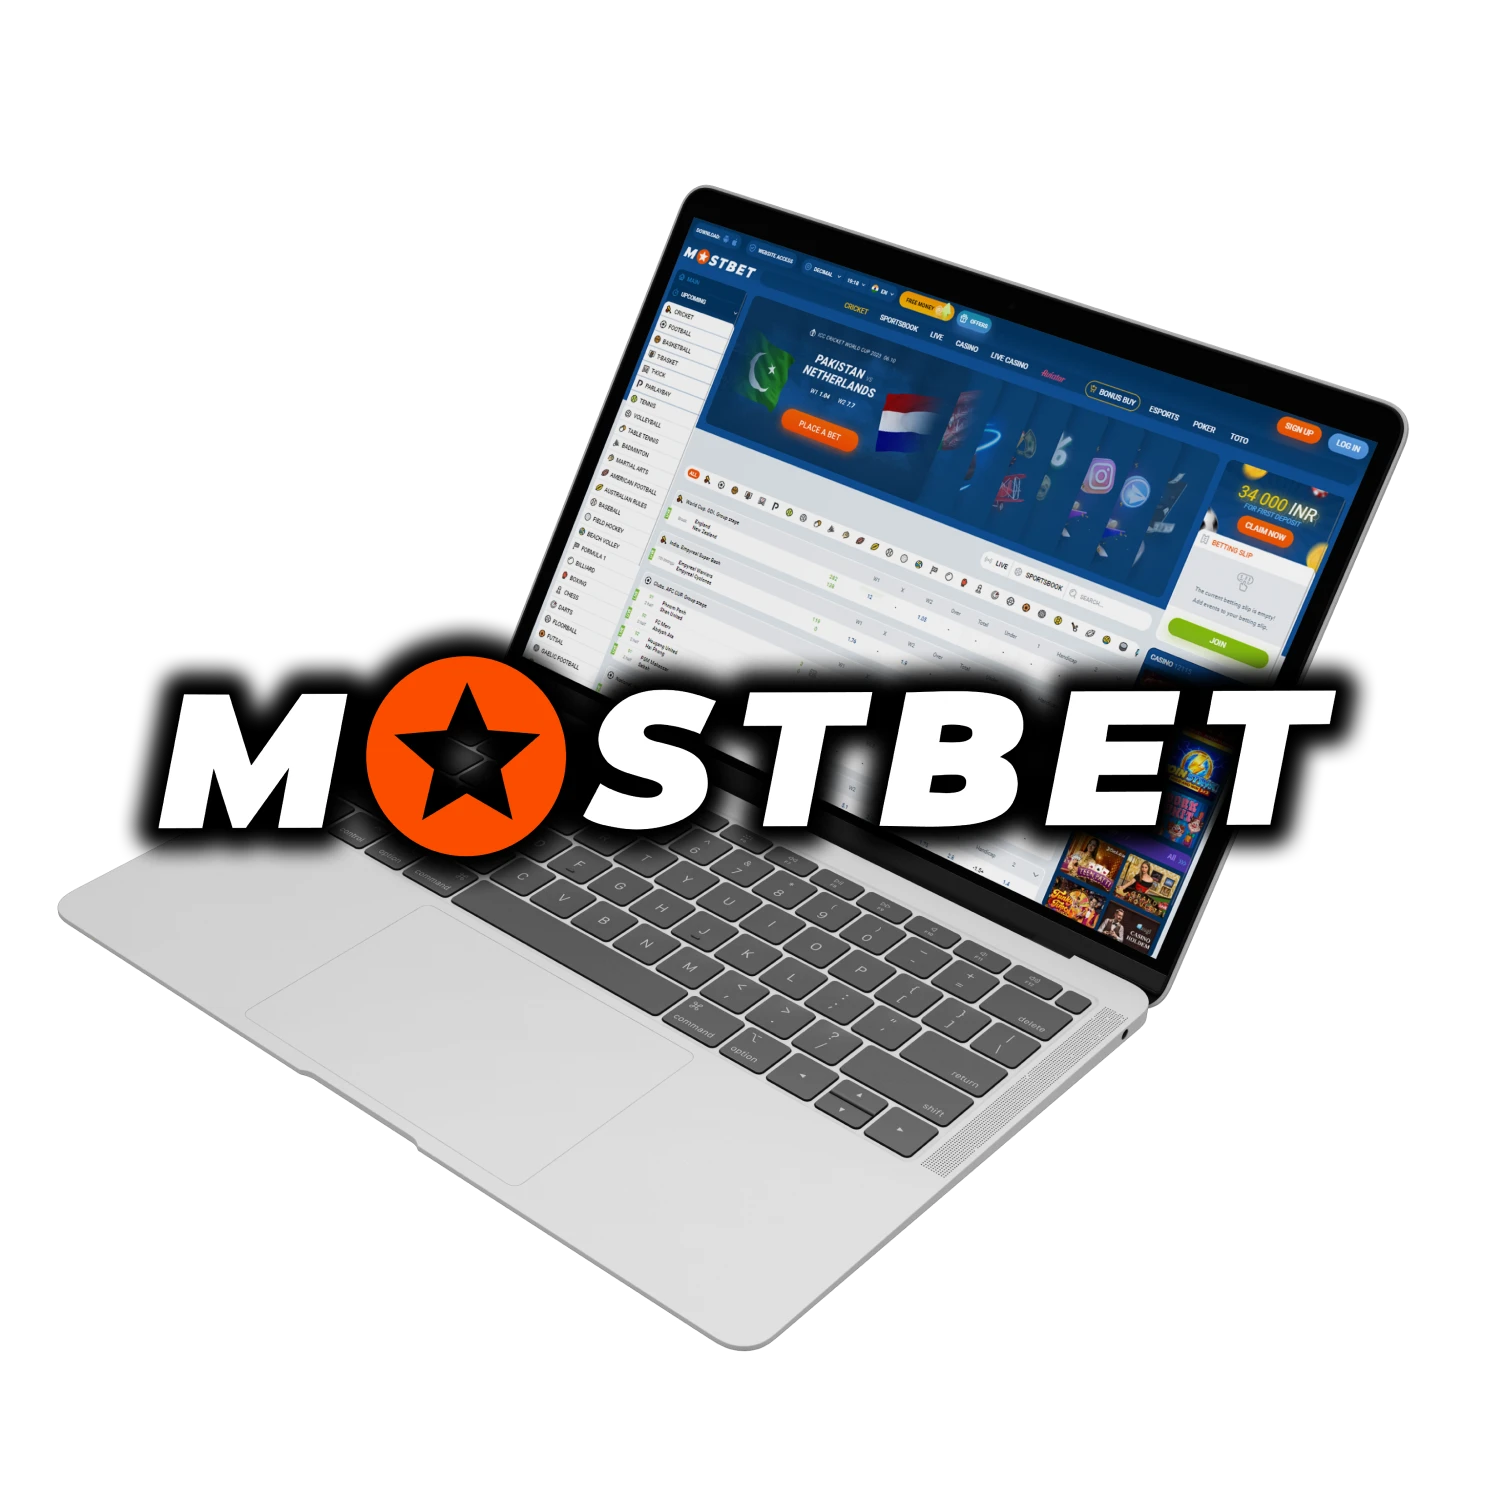 With Mostbet, make bets using a convenient application on your personal computer.